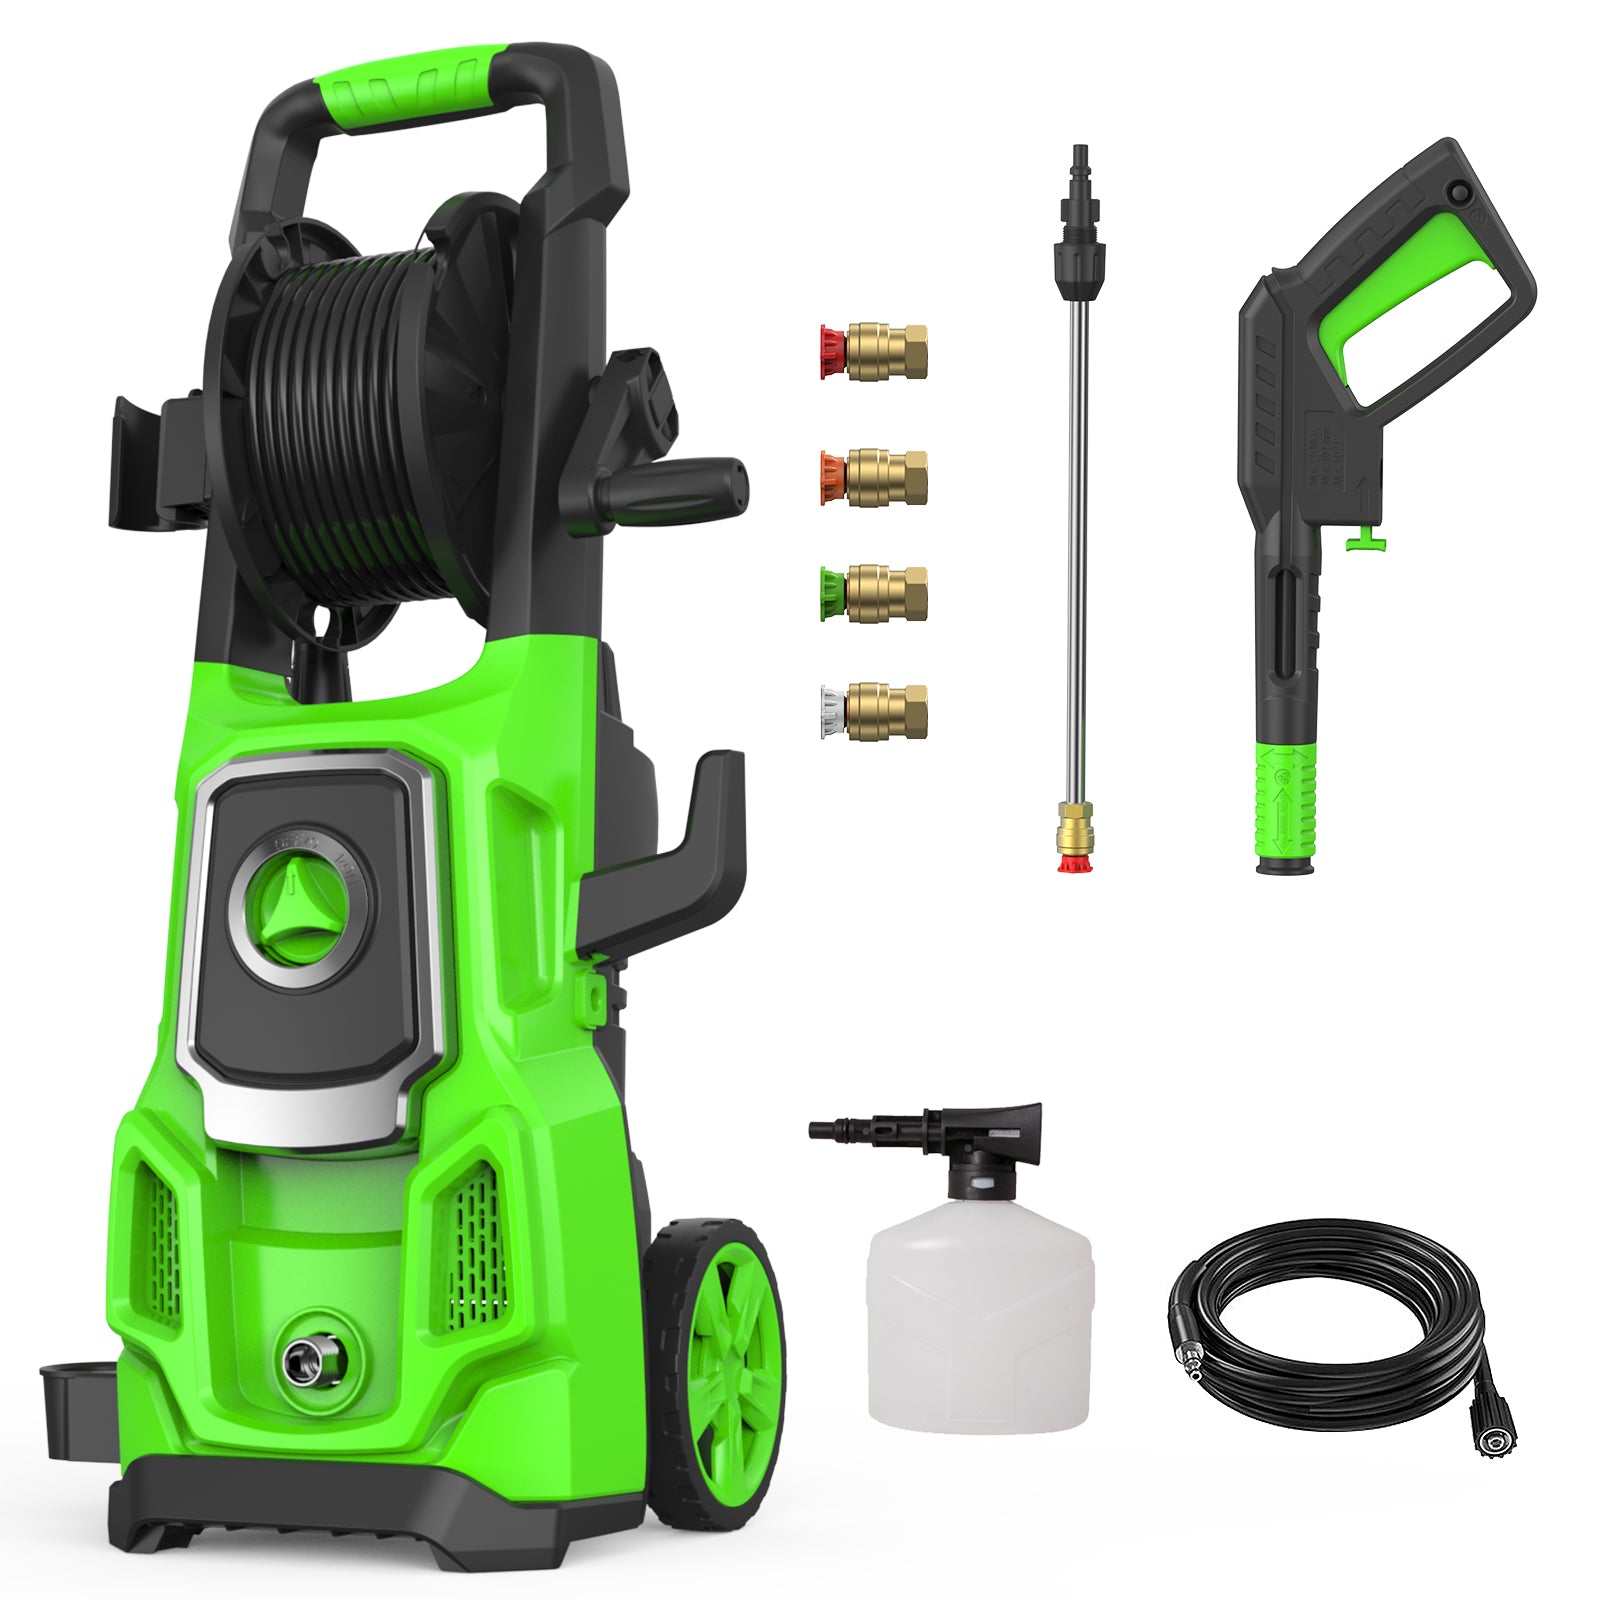 Paris Rhone SI-TH004 Electric Pressure Washer, 3200 Max PSI, 2.6 GPM Power Washer Machine with Hose Reel,4 Quick Connect Nozzles WM